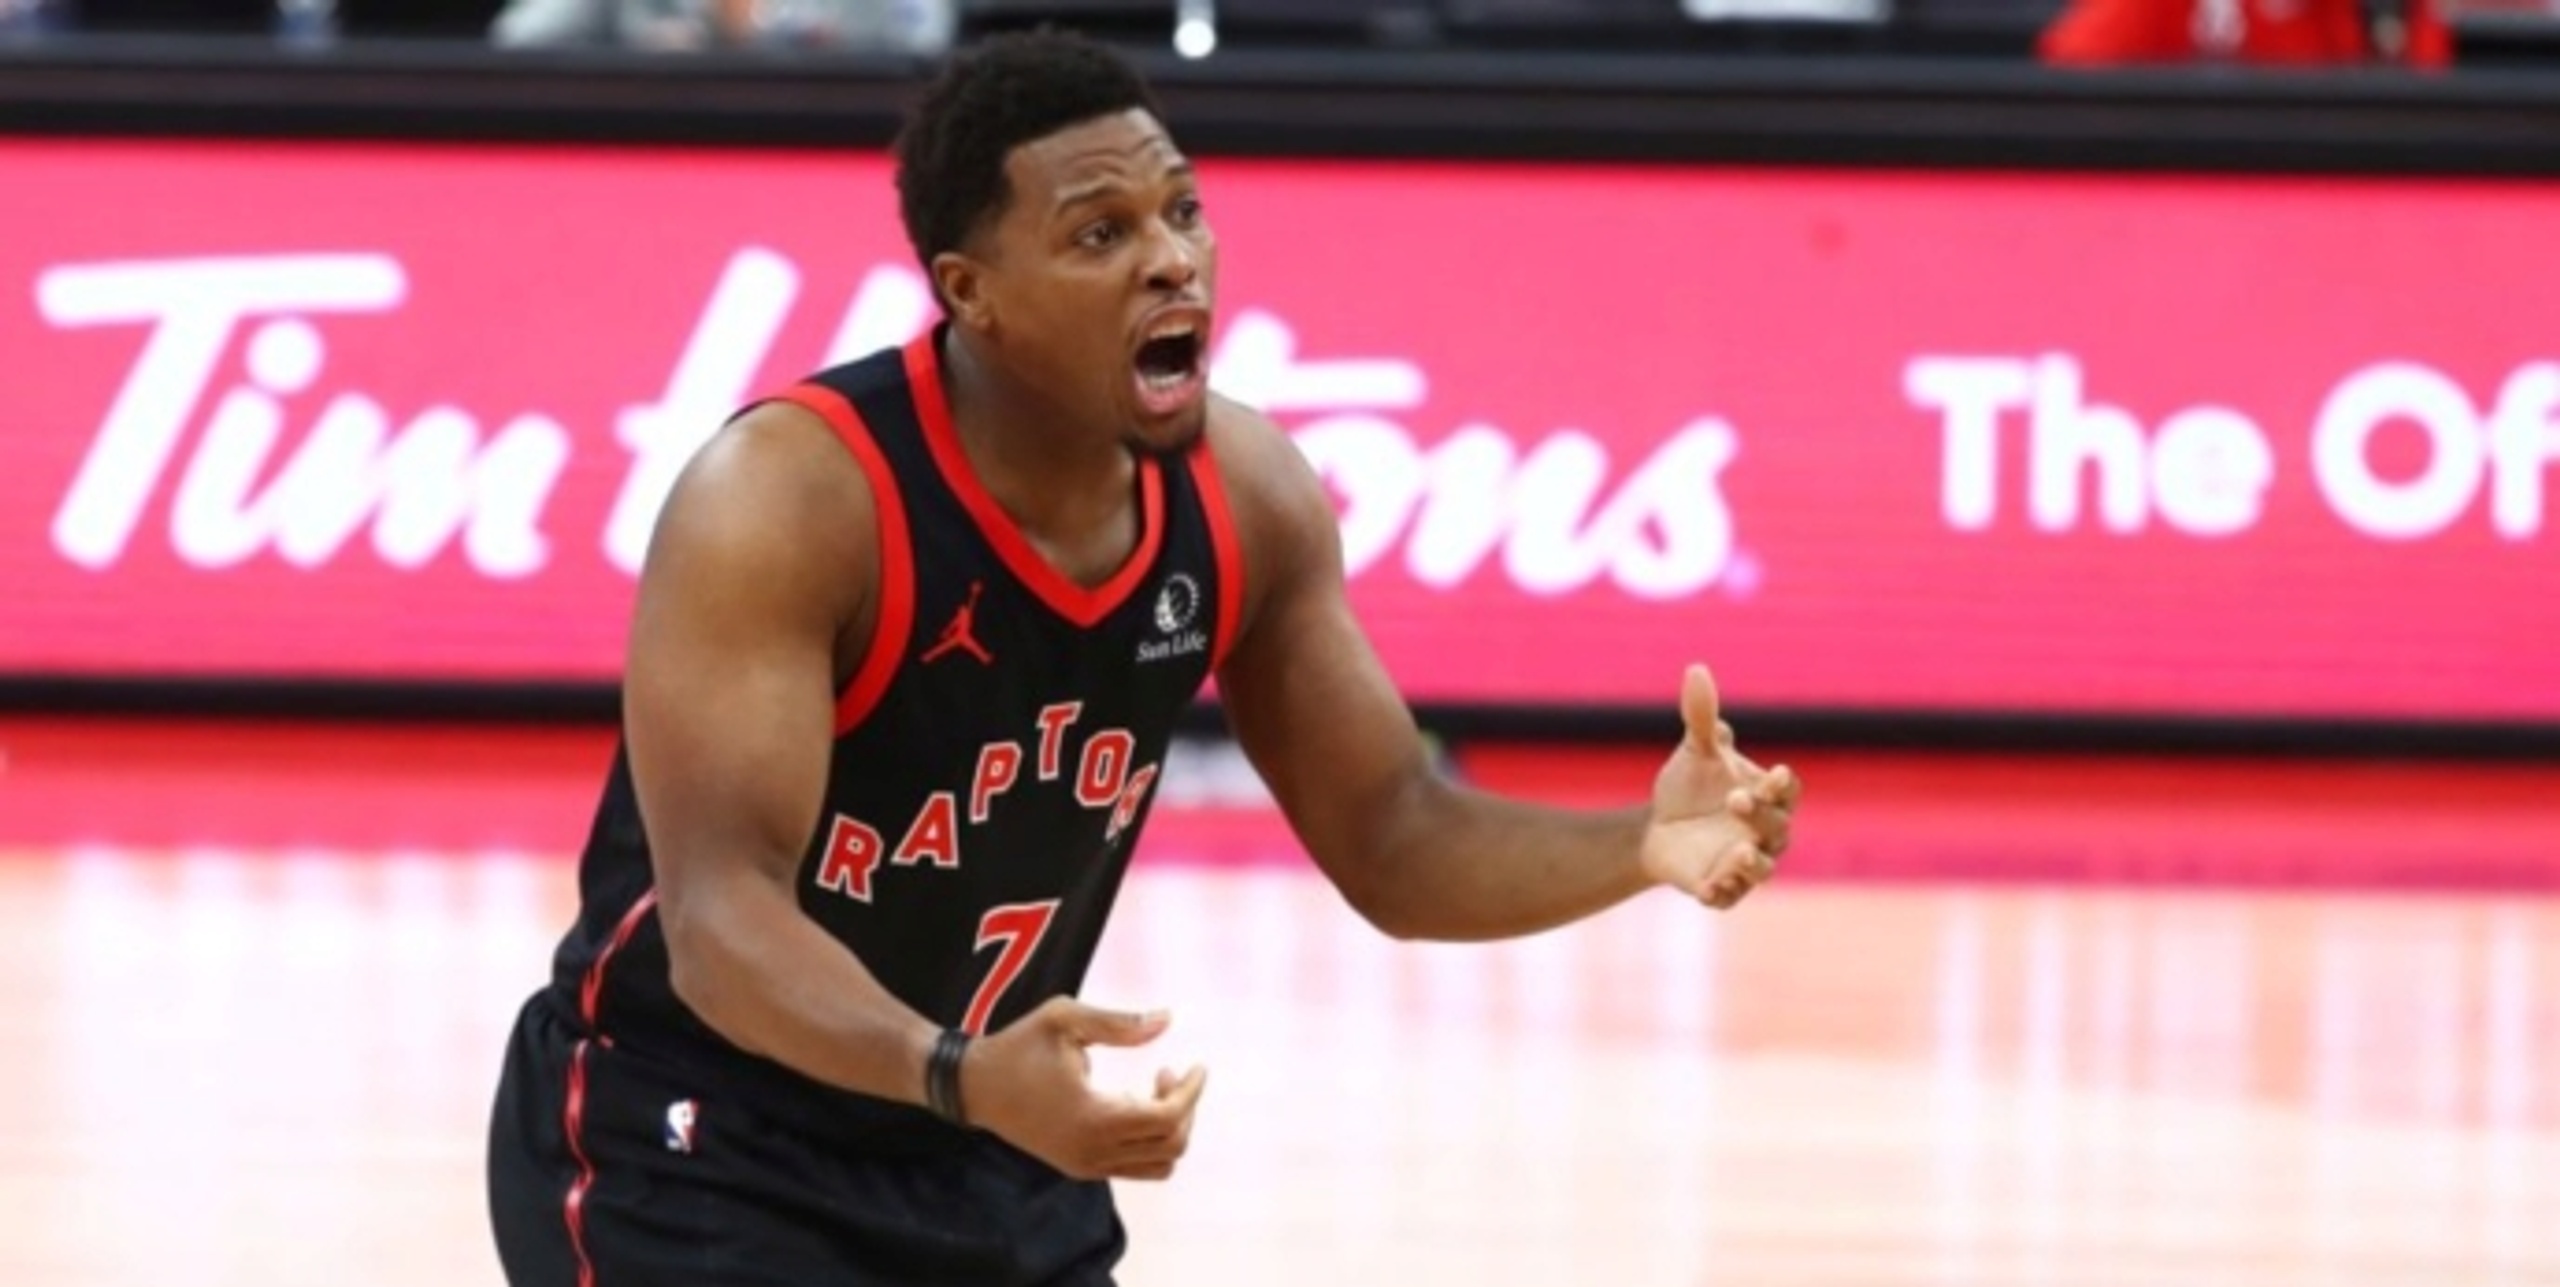 Examining the Raptors' 13-0 record without Kyle Lowry